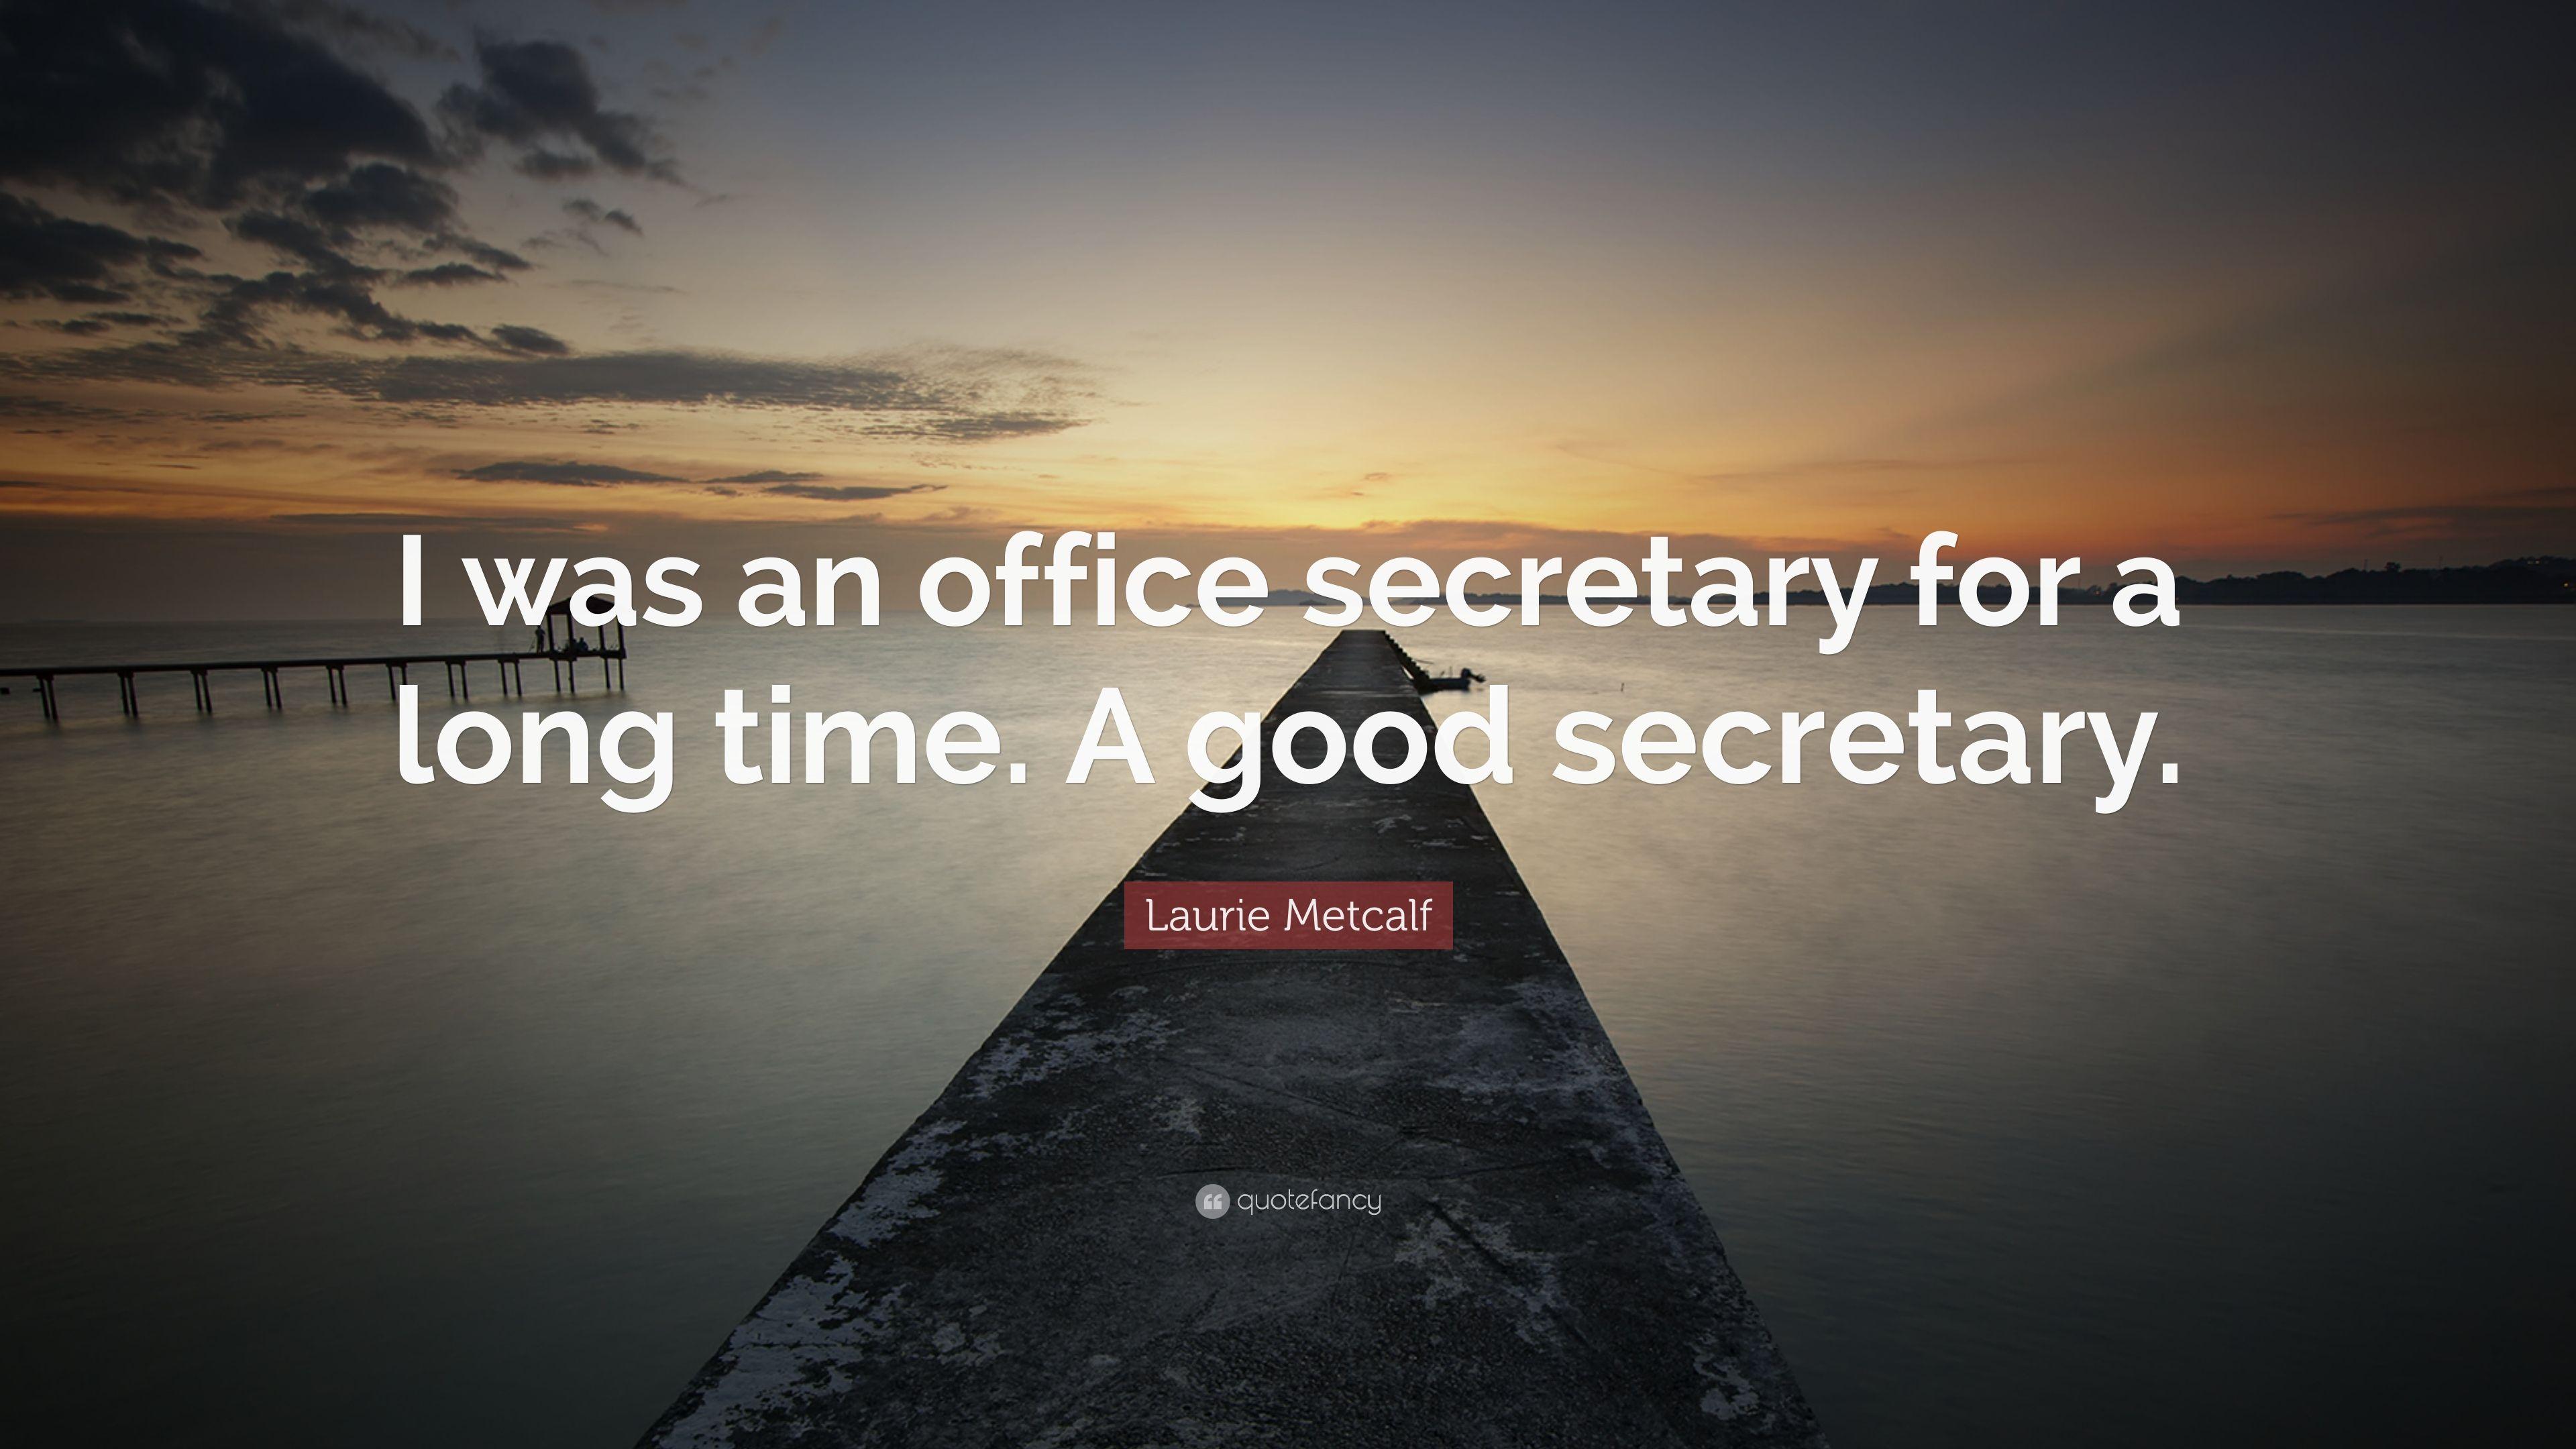 Laurie Metcalf Quote: “I was an office secretary for a long time. A